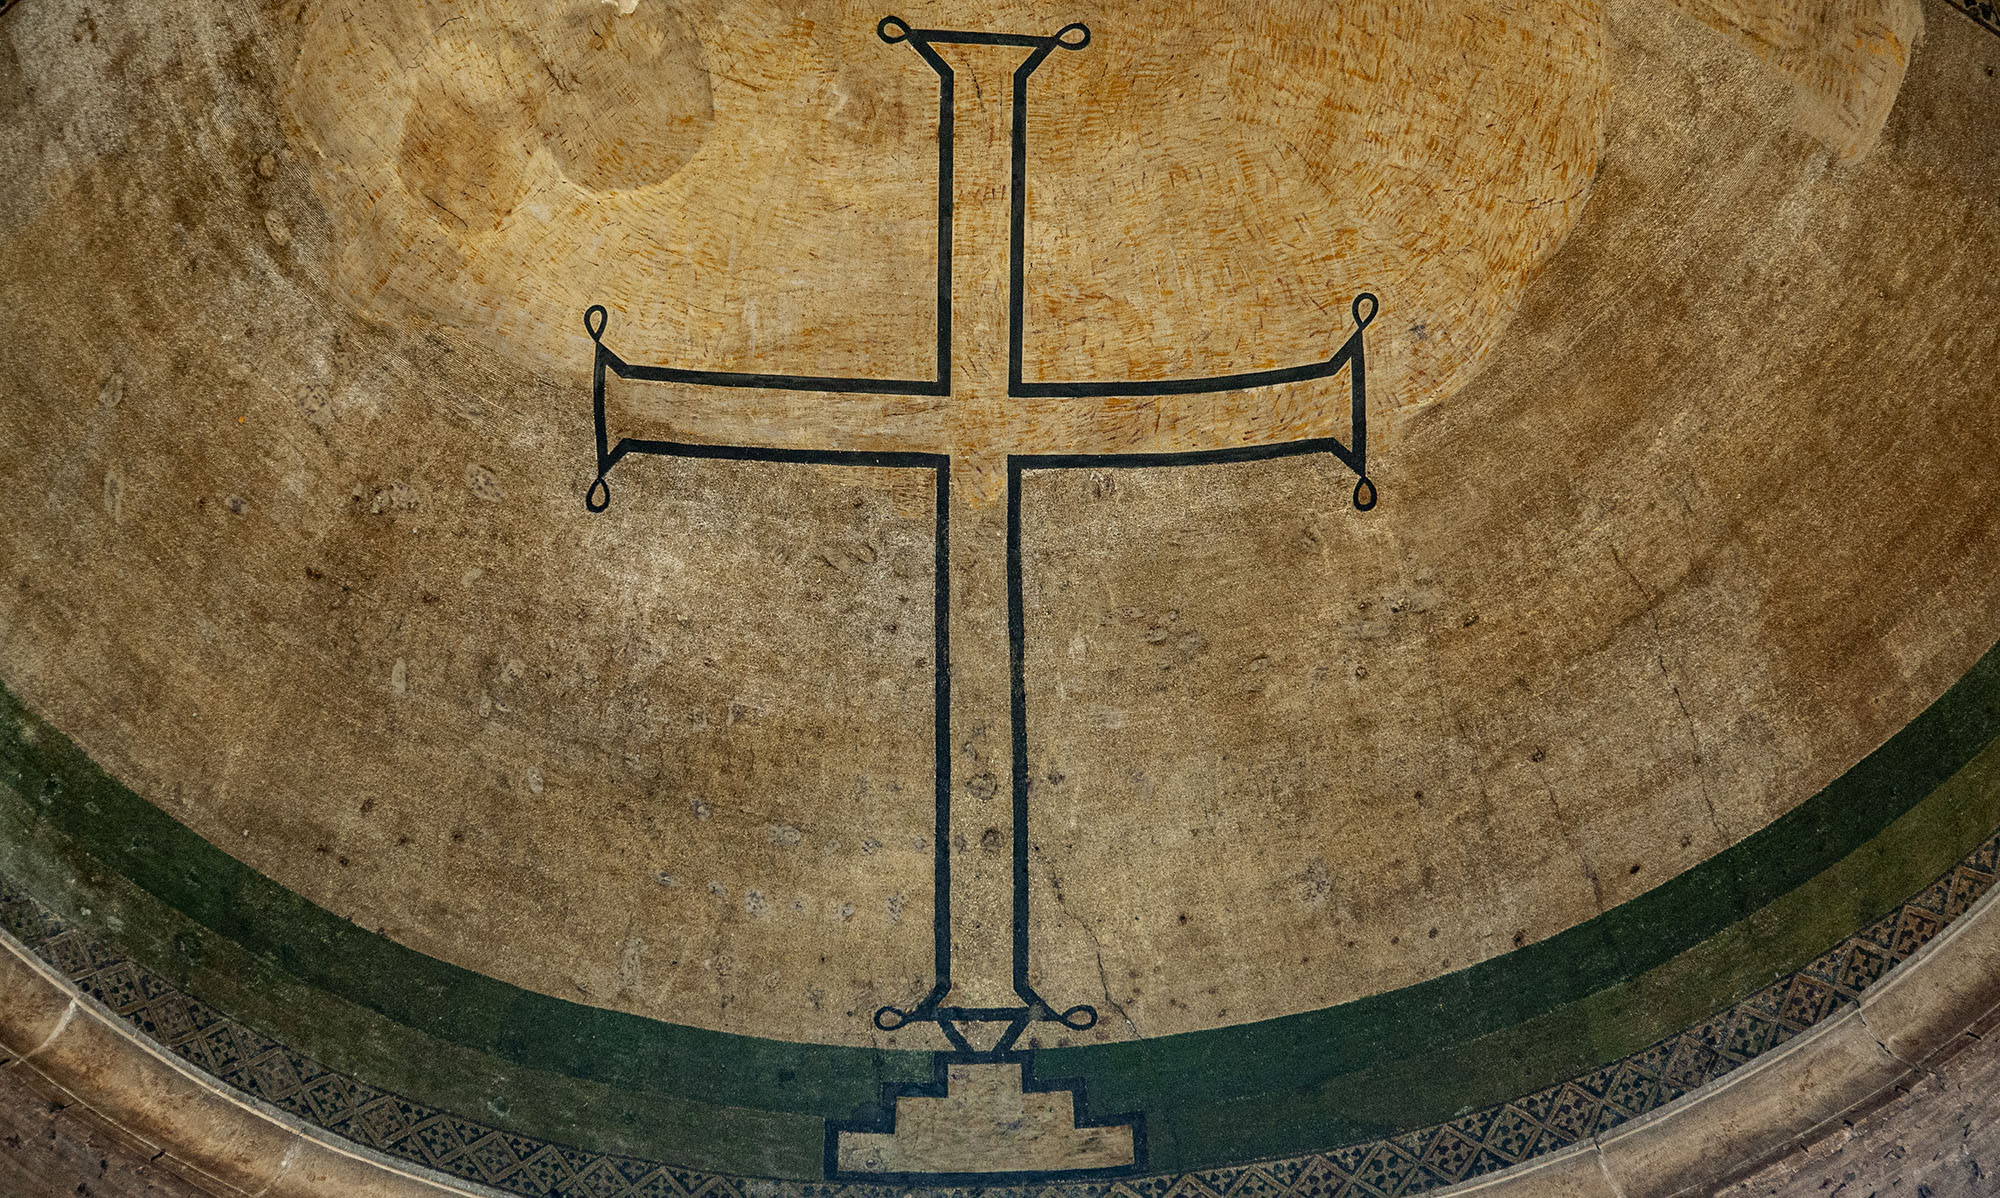 Apse mosaic with cross, Hagia Eirene, rebuilt after 740, Constantinople (Istanbul) (photo: byzantologist, CC BY-NC-SA 2.0)